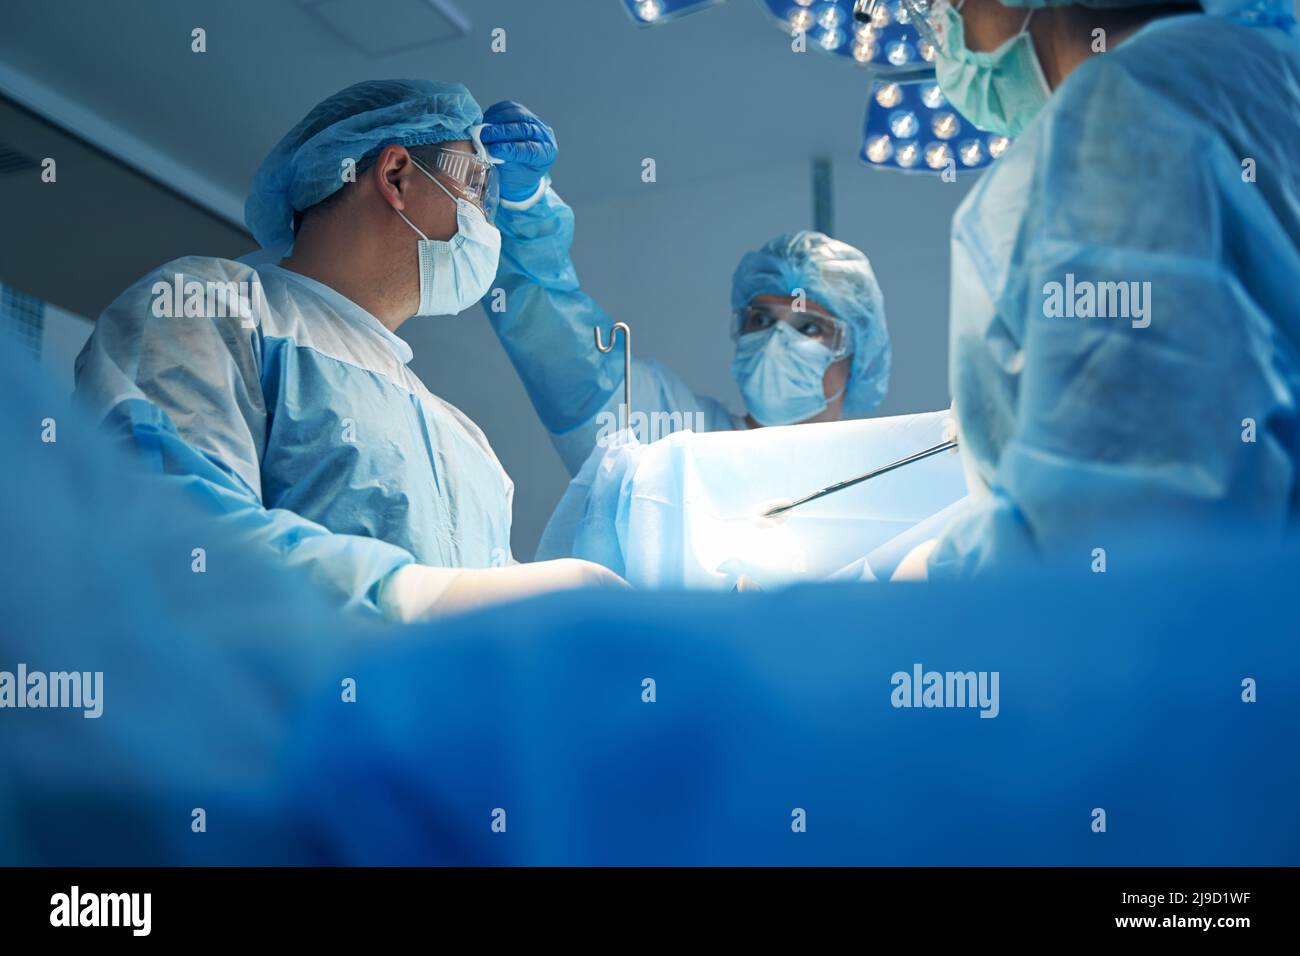 Nurse wiping sweat from surgeon forehead during operation Stock Photo